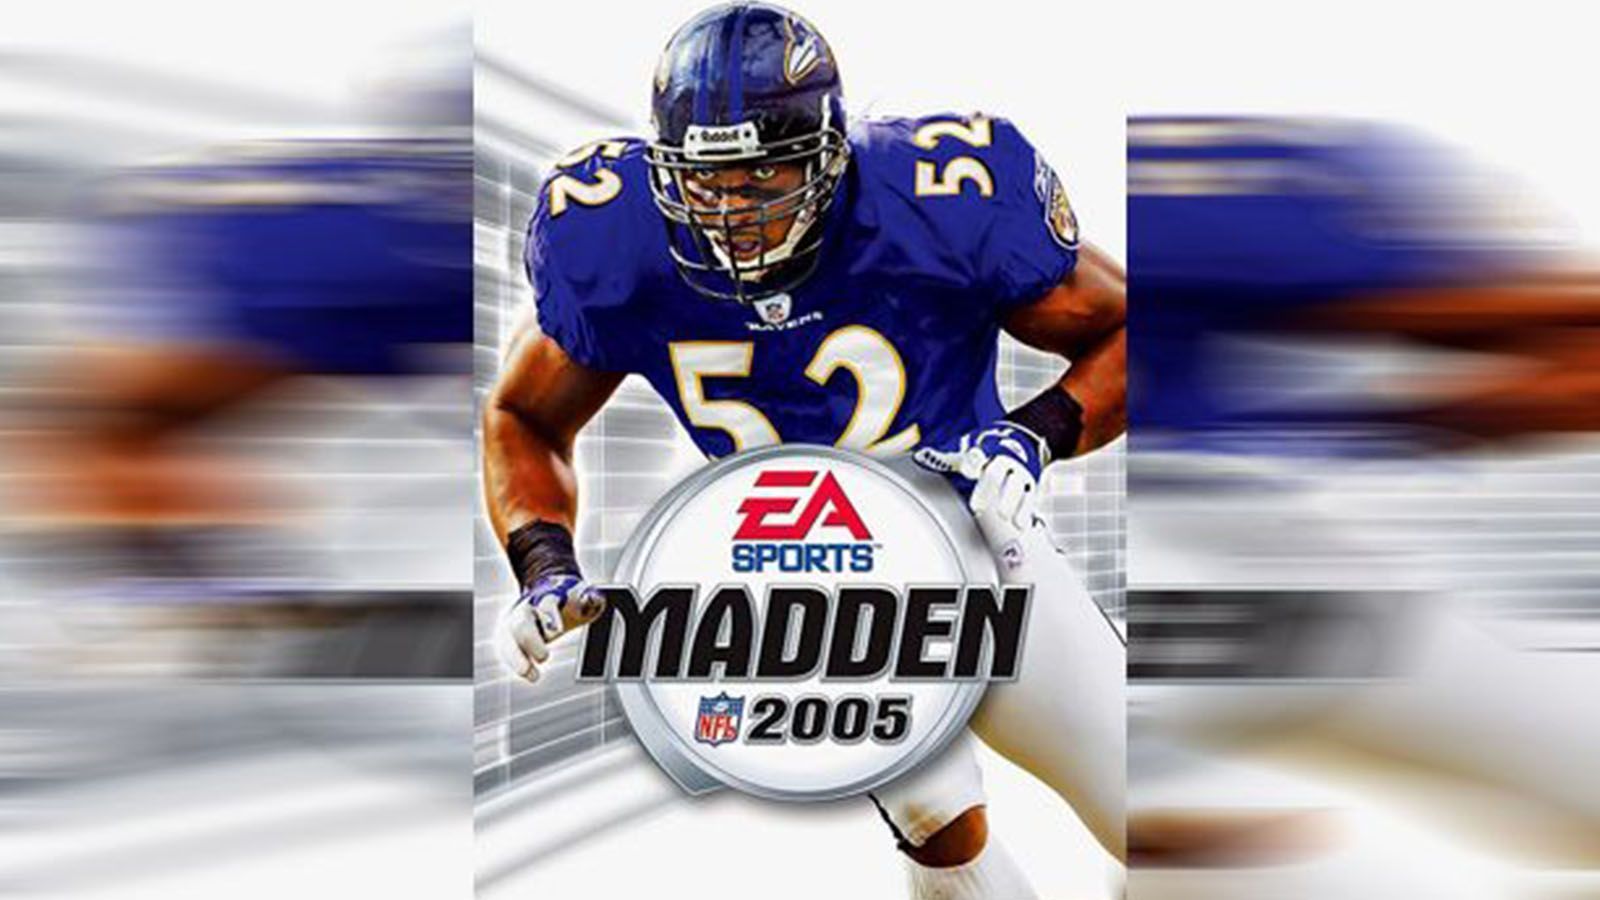 
                <strong>Madden NFL 2005</strong><br>
                Madden NFL 2005 - Cover-Spieler: Ray Lewis.
              